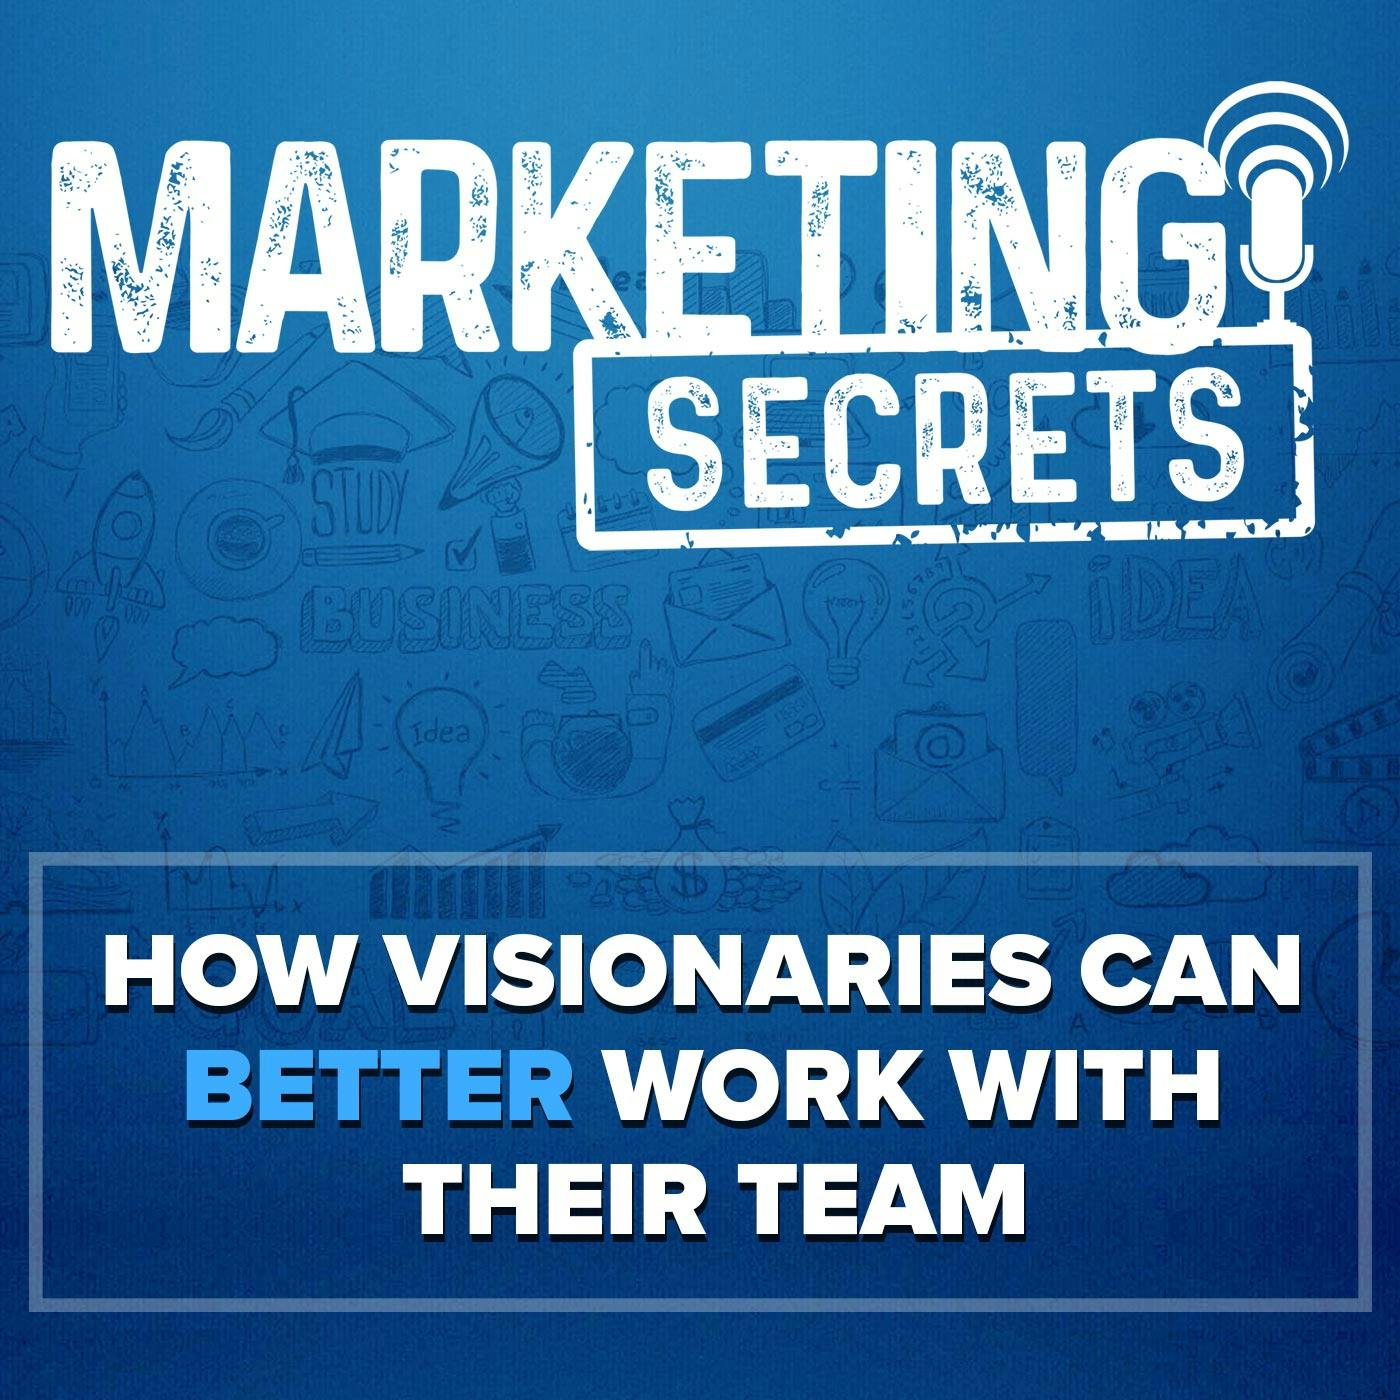 How Visionaries Can Better Work With Their Team